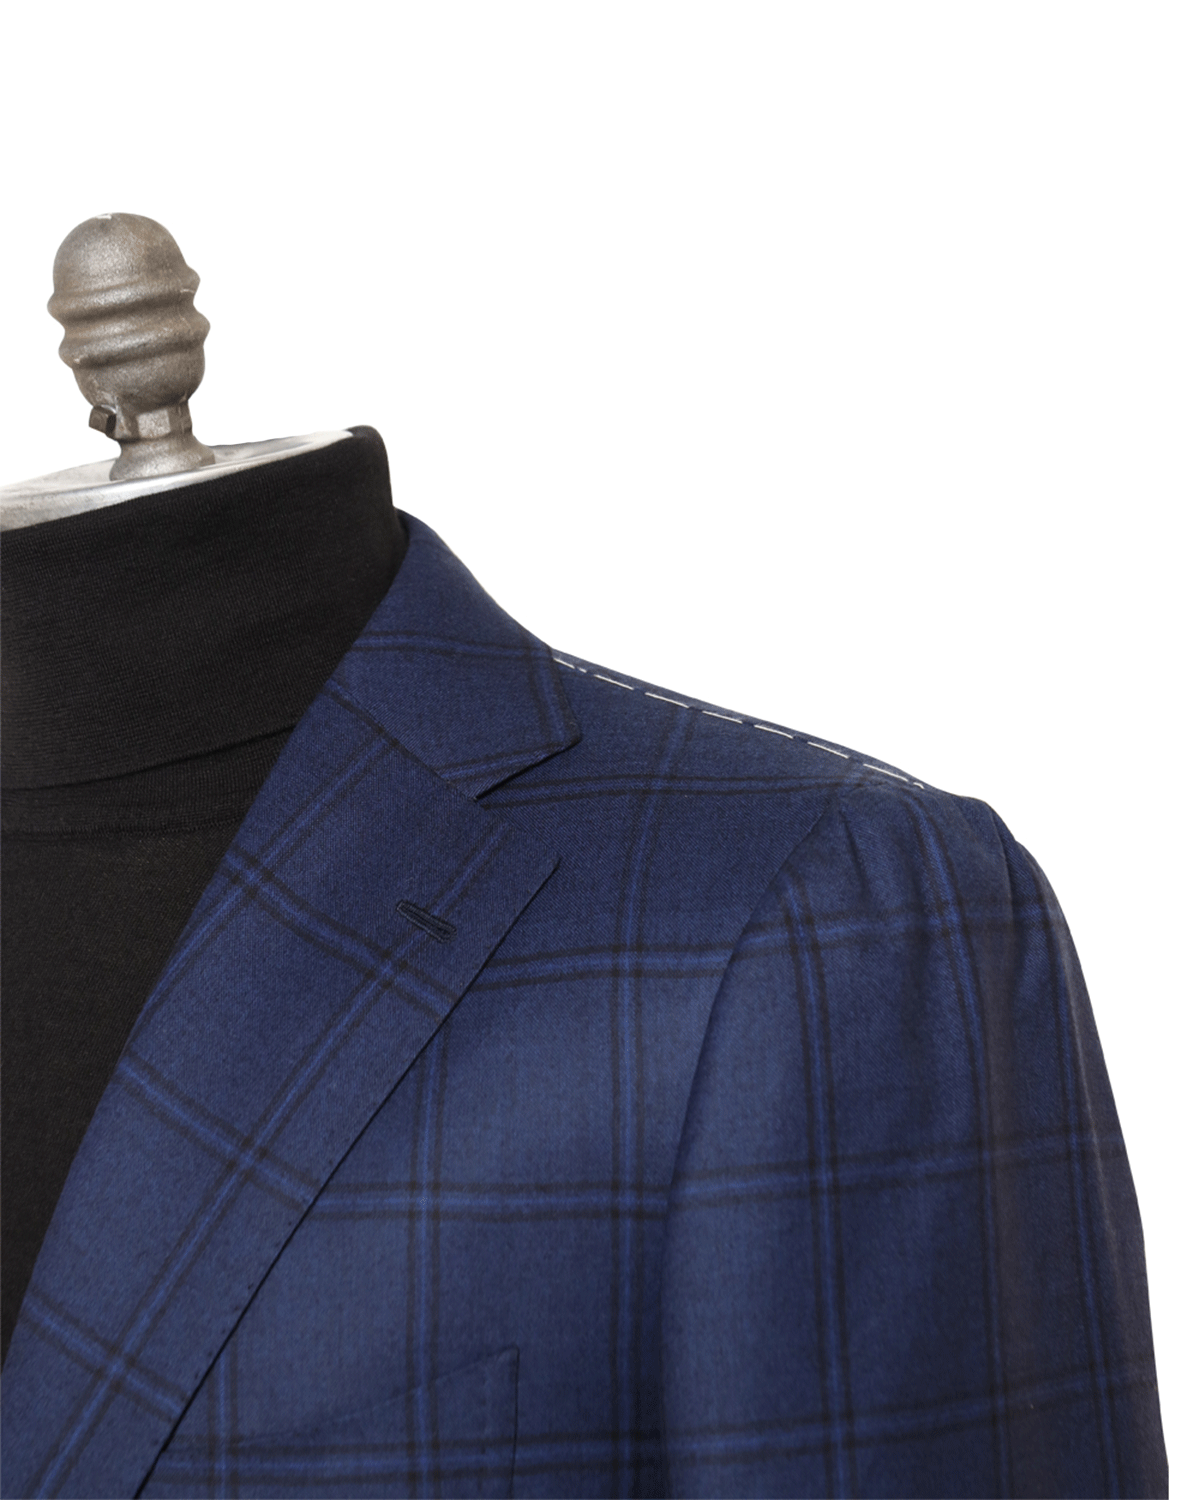 Attolini High Blue and Navy Windowpane Wool Suit